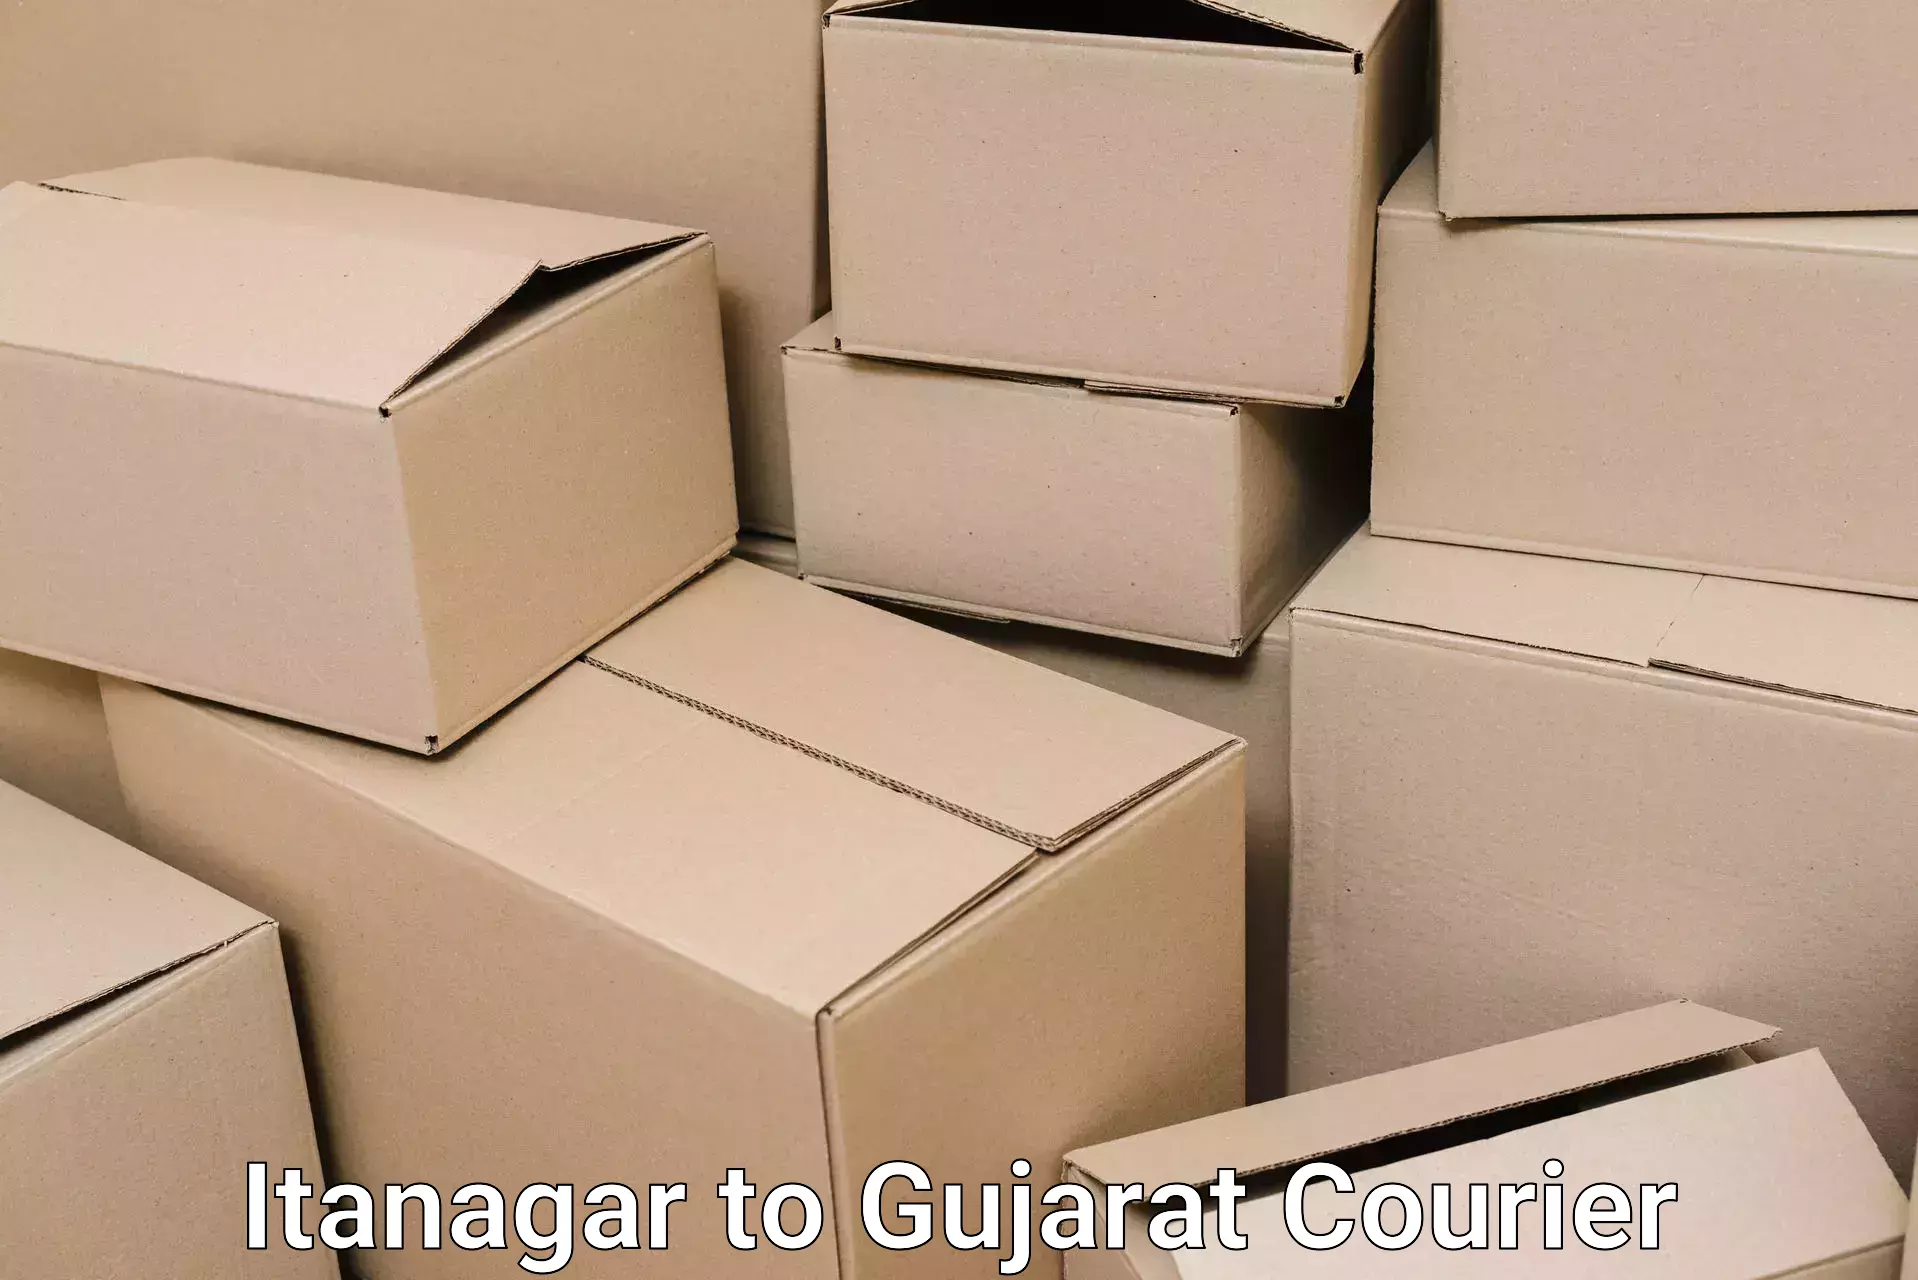 Trusted relocation experts Itanagar to Gujarat